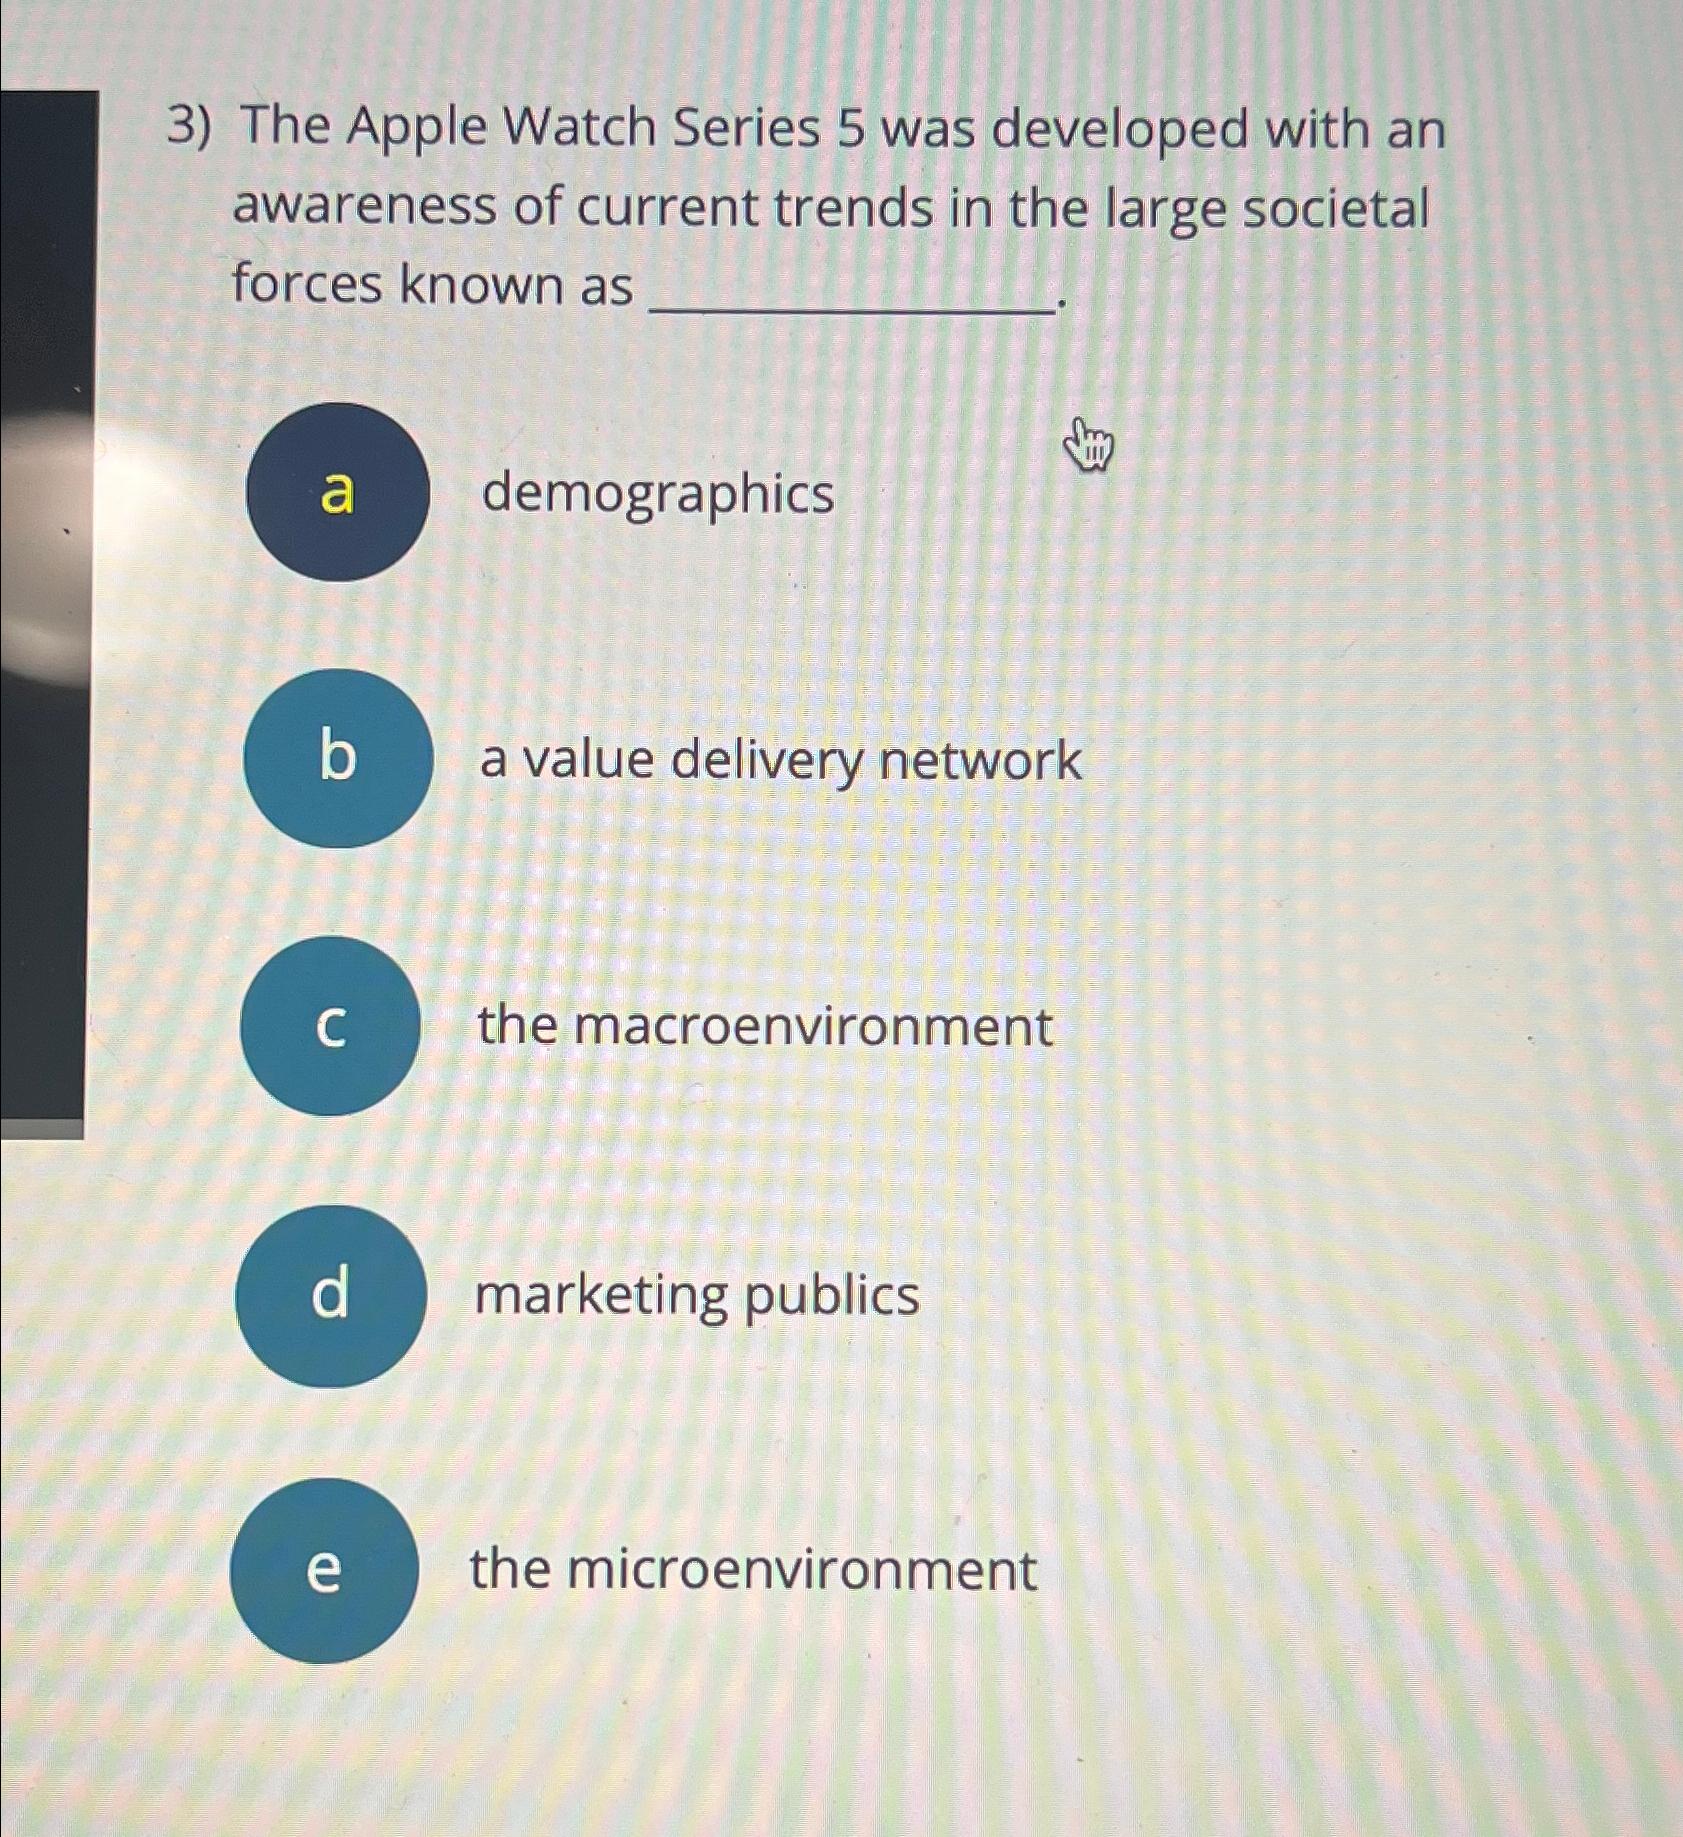 3) The Apple Watch Series 5 was developed with an awareness of current trends in the large societal forces